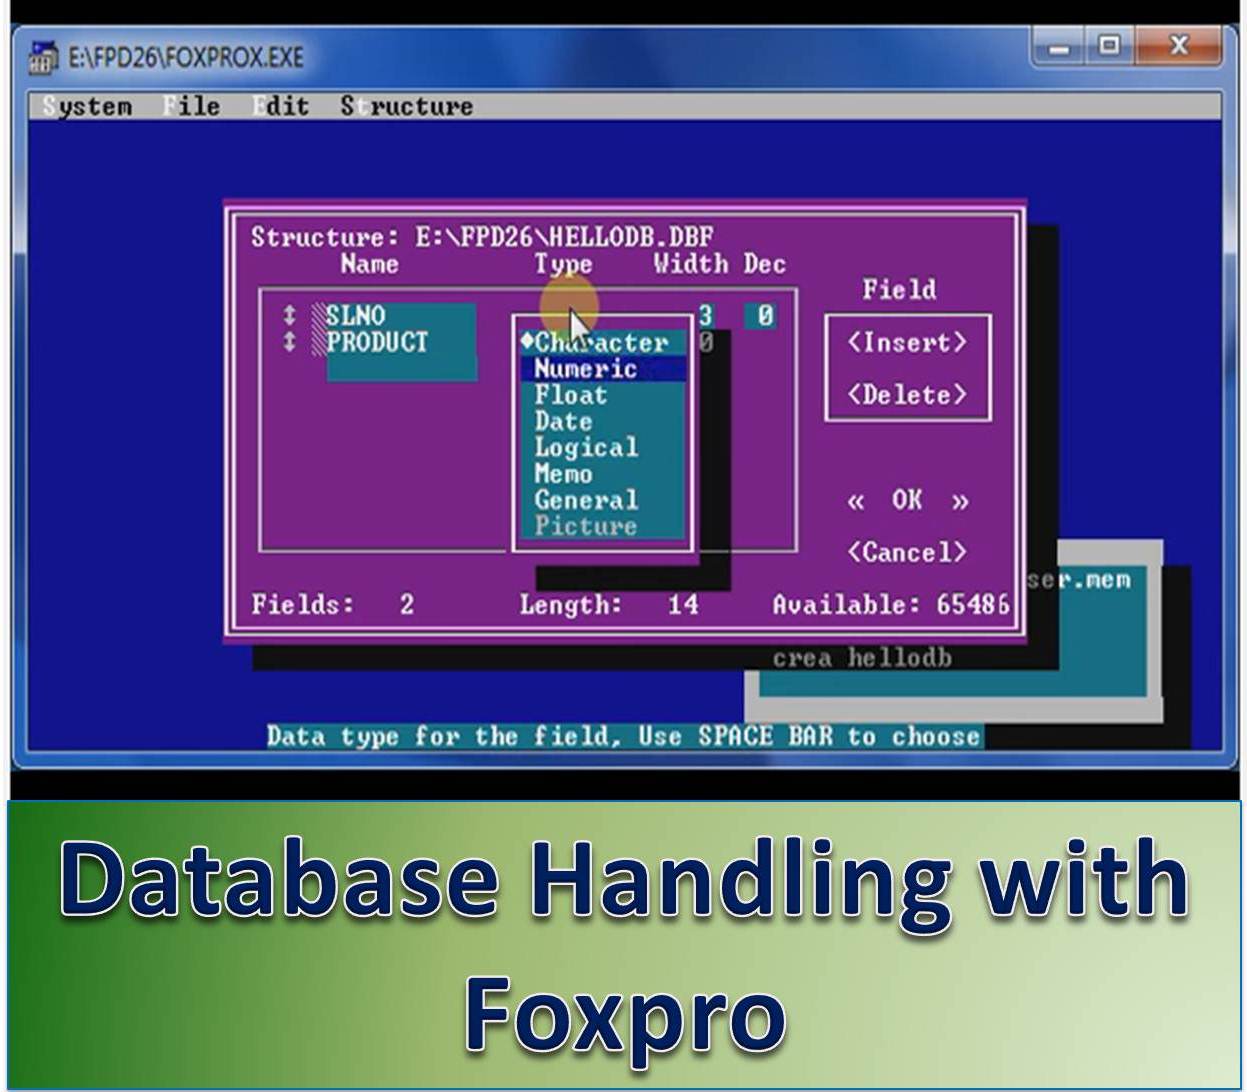 http://study.aisectonline.com/images/Database Handling with Foxpro.jpg